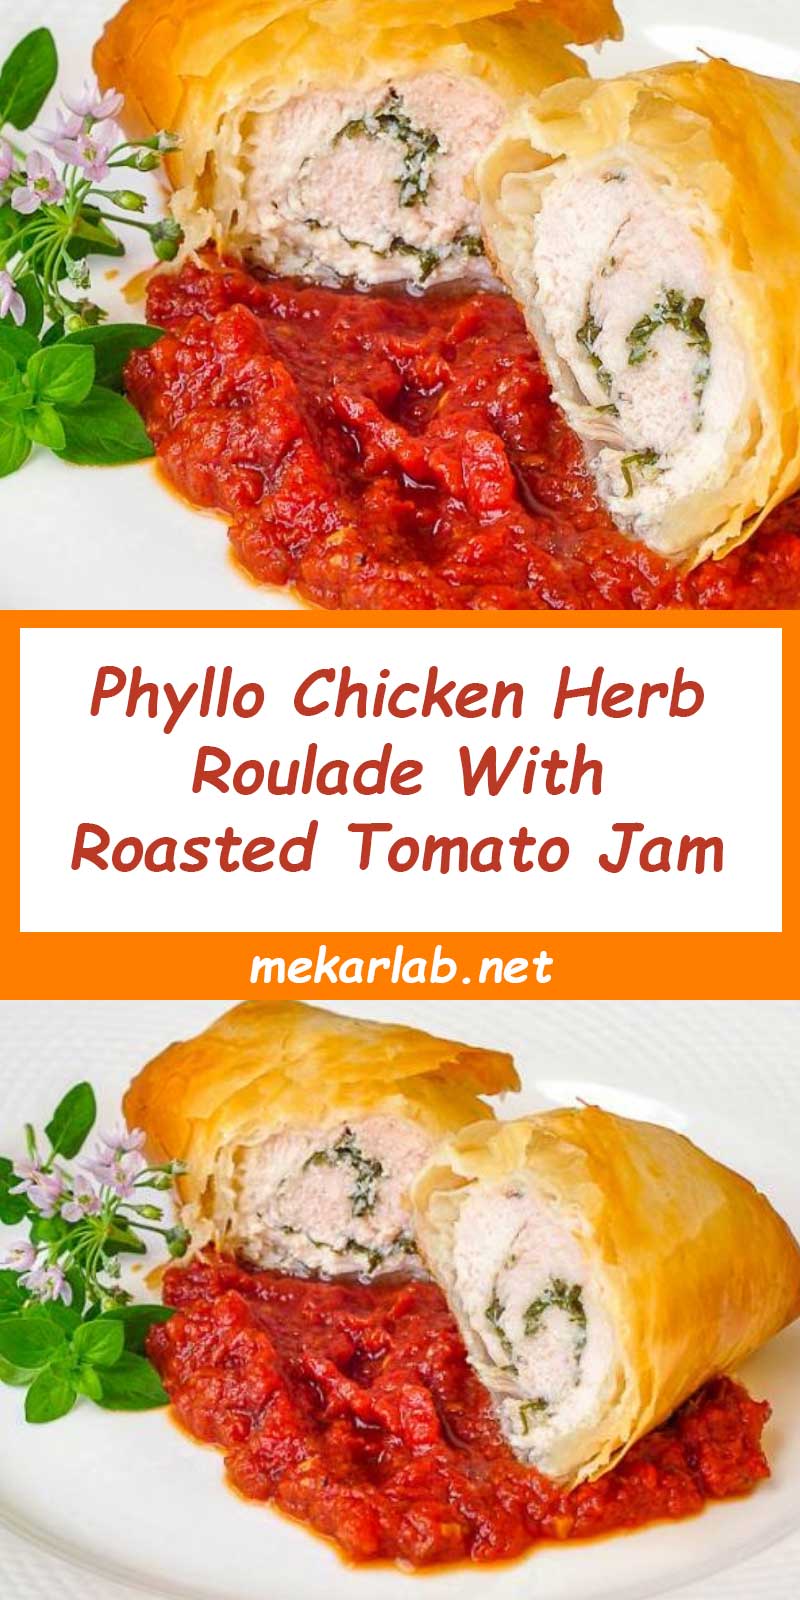 Phyllo Chicken Herb Roulade With Roasted Tomato Jam